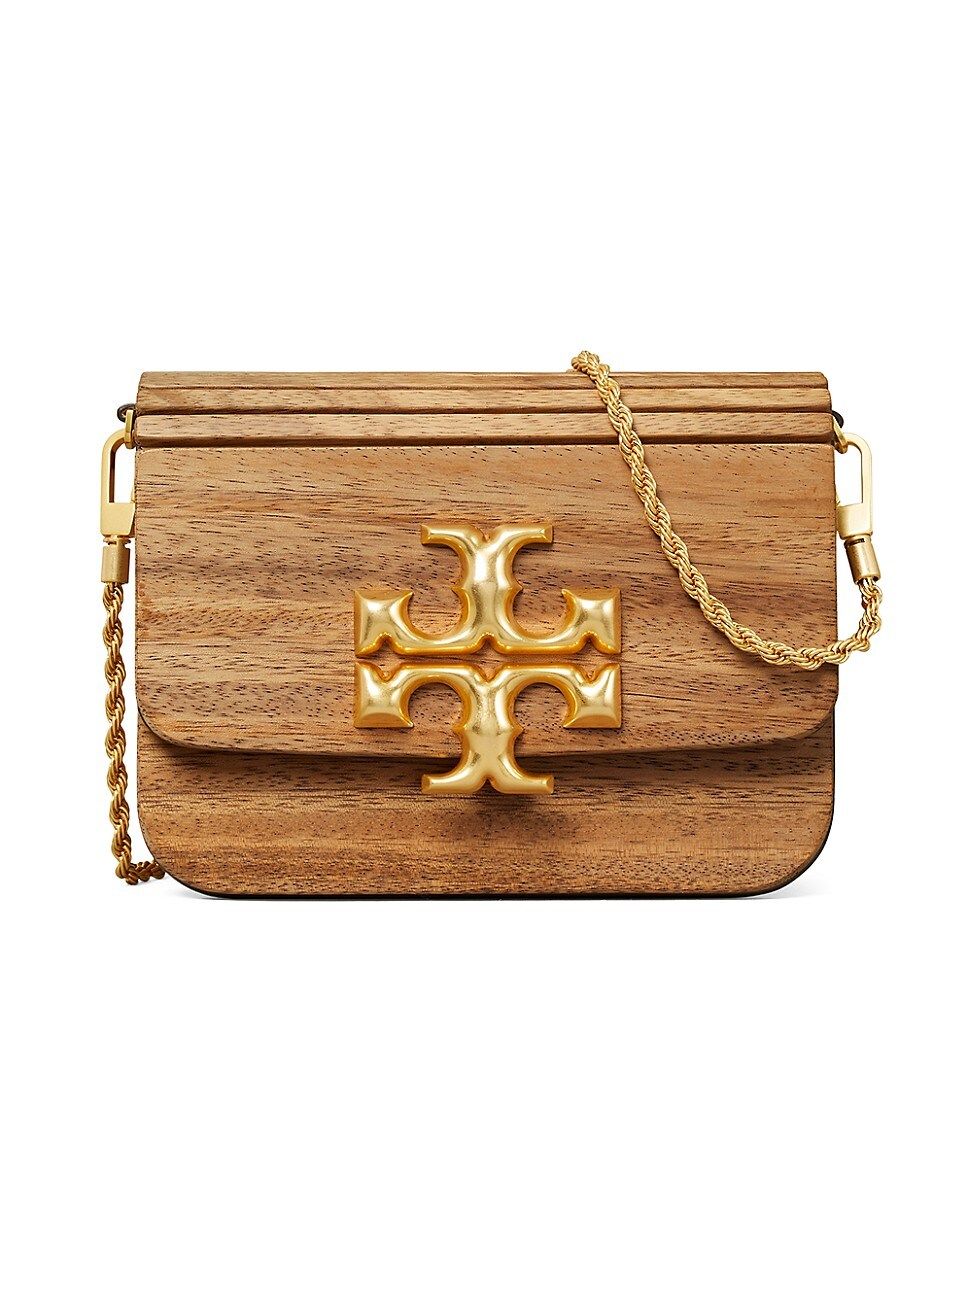 Tory Burch Women's Small Eleanor Wood & Leather Shoulder Bag - Natural | Saks Fifth Avenue